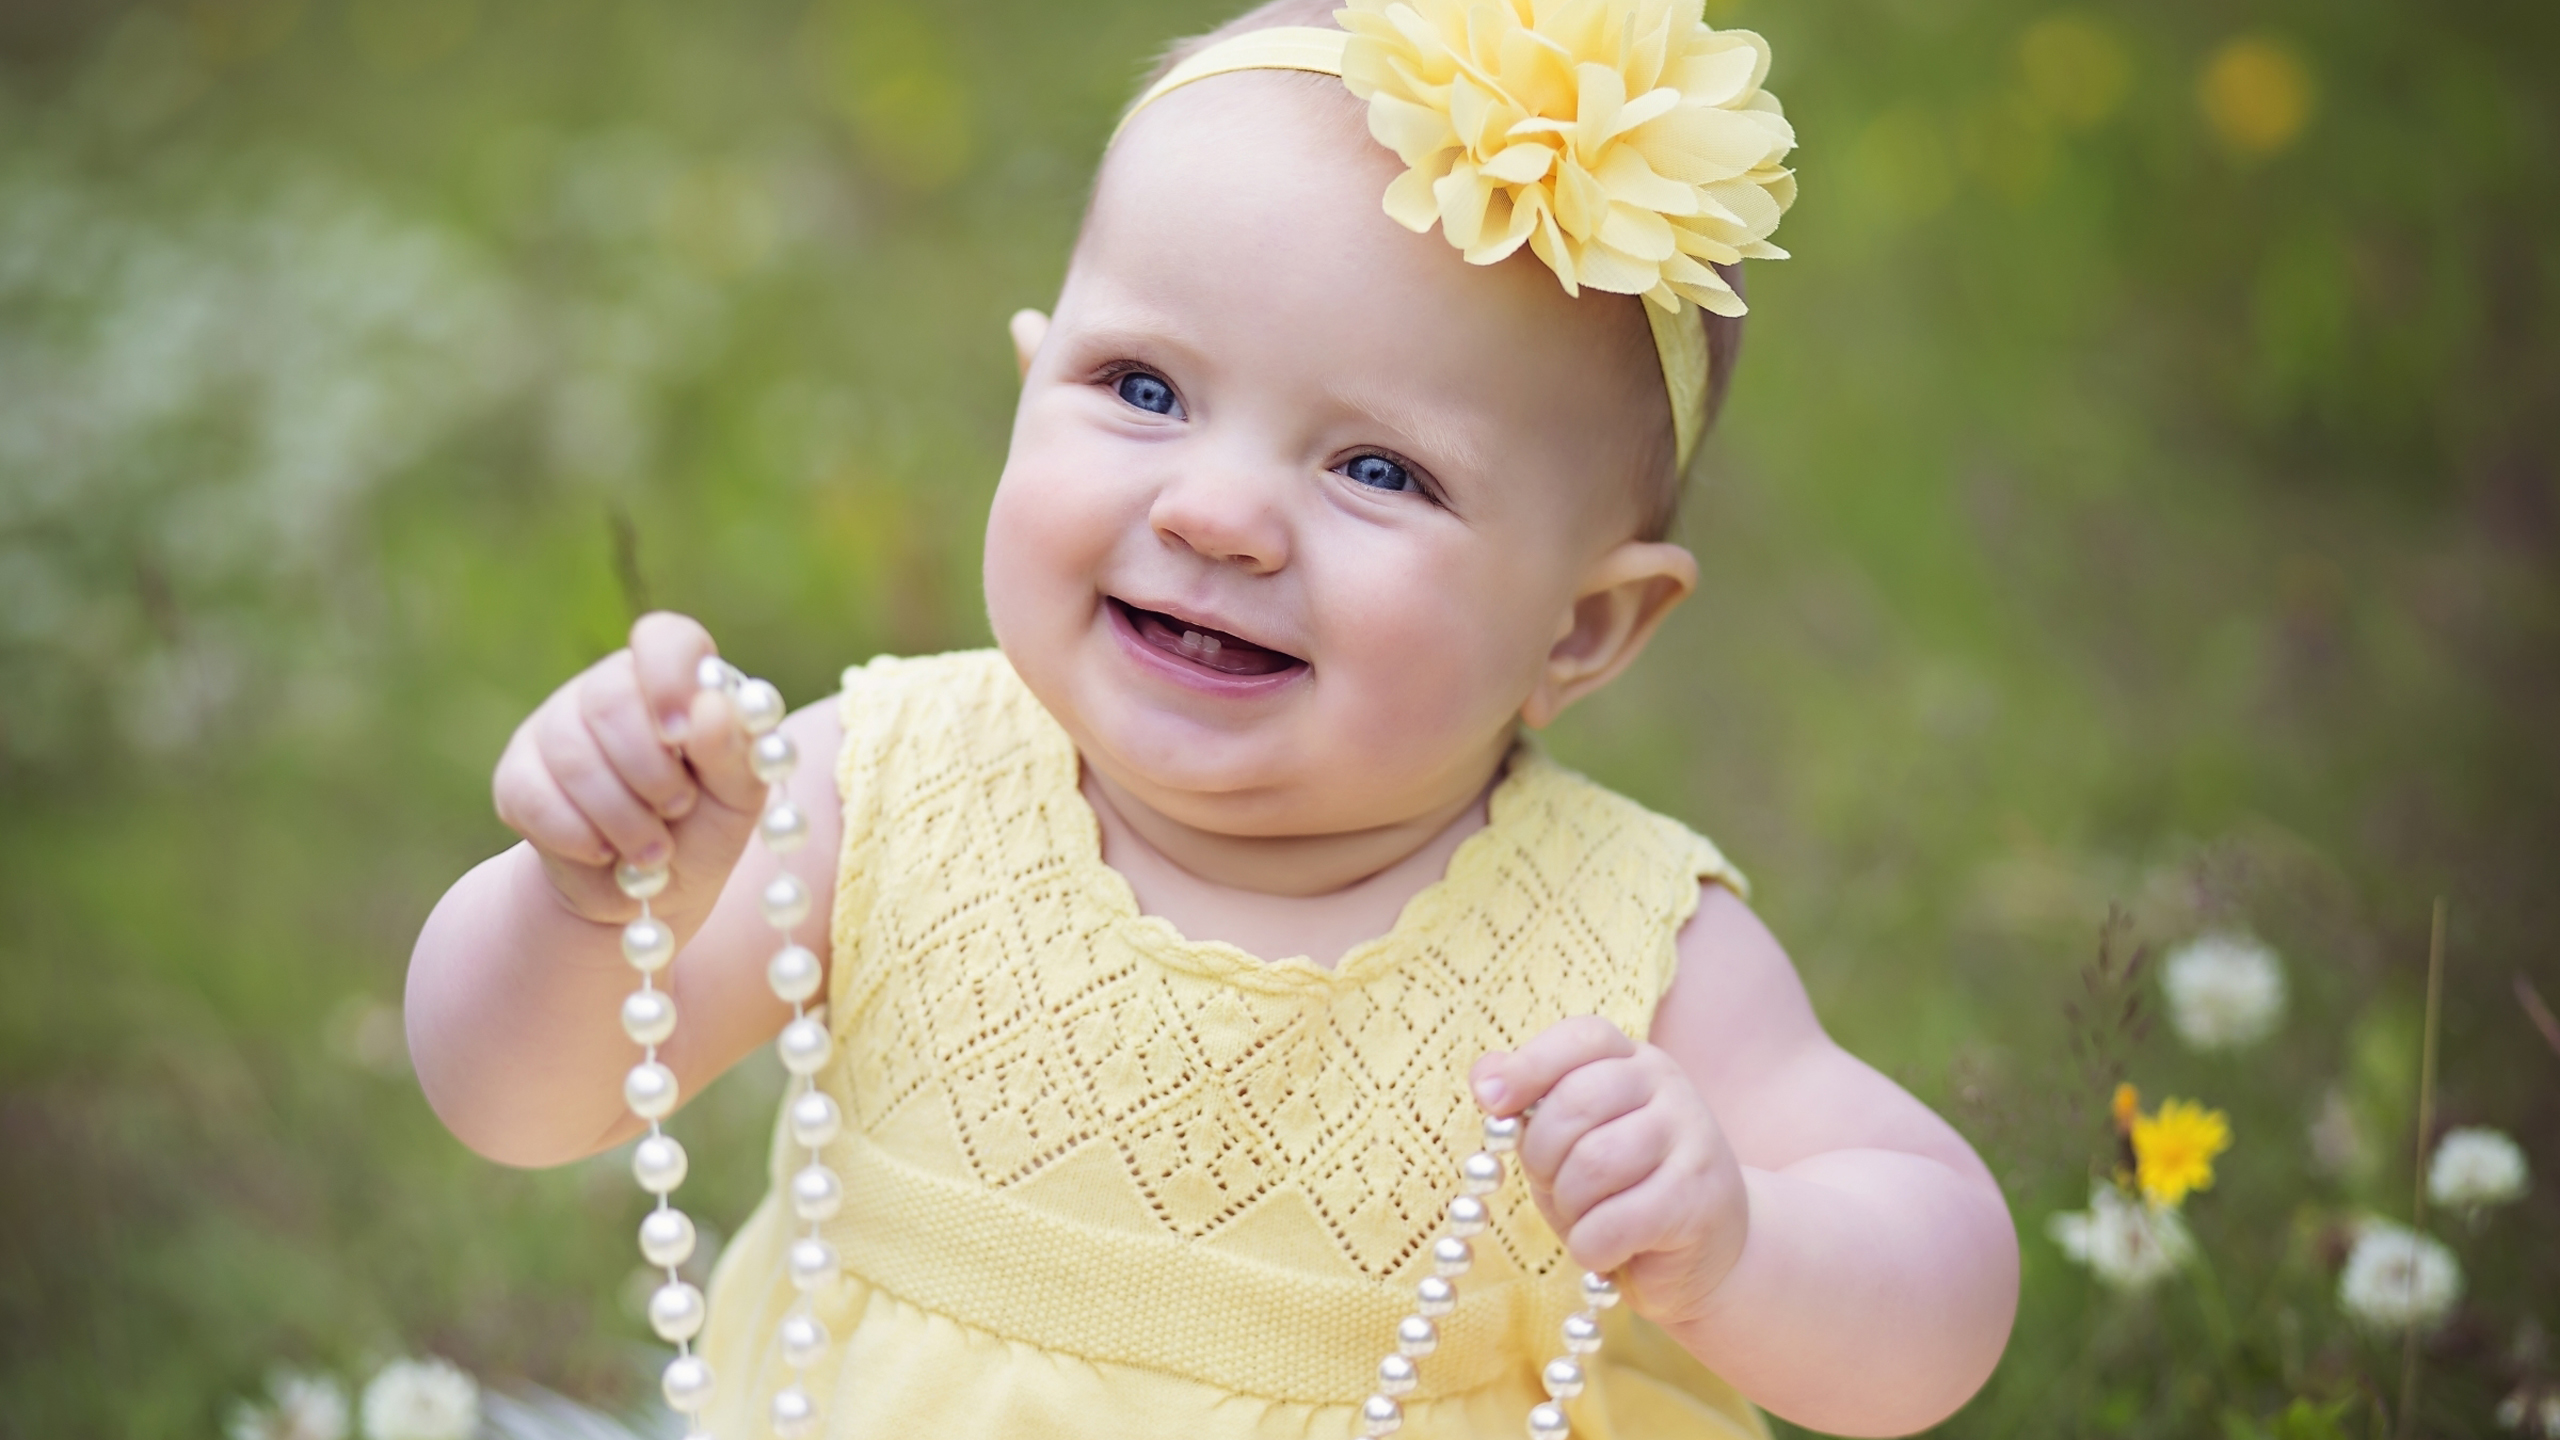 Smiley Baby Girl Child With Beads Is Wearing Yellow Dress And Headband In Blur Wallpaper 2K Cute